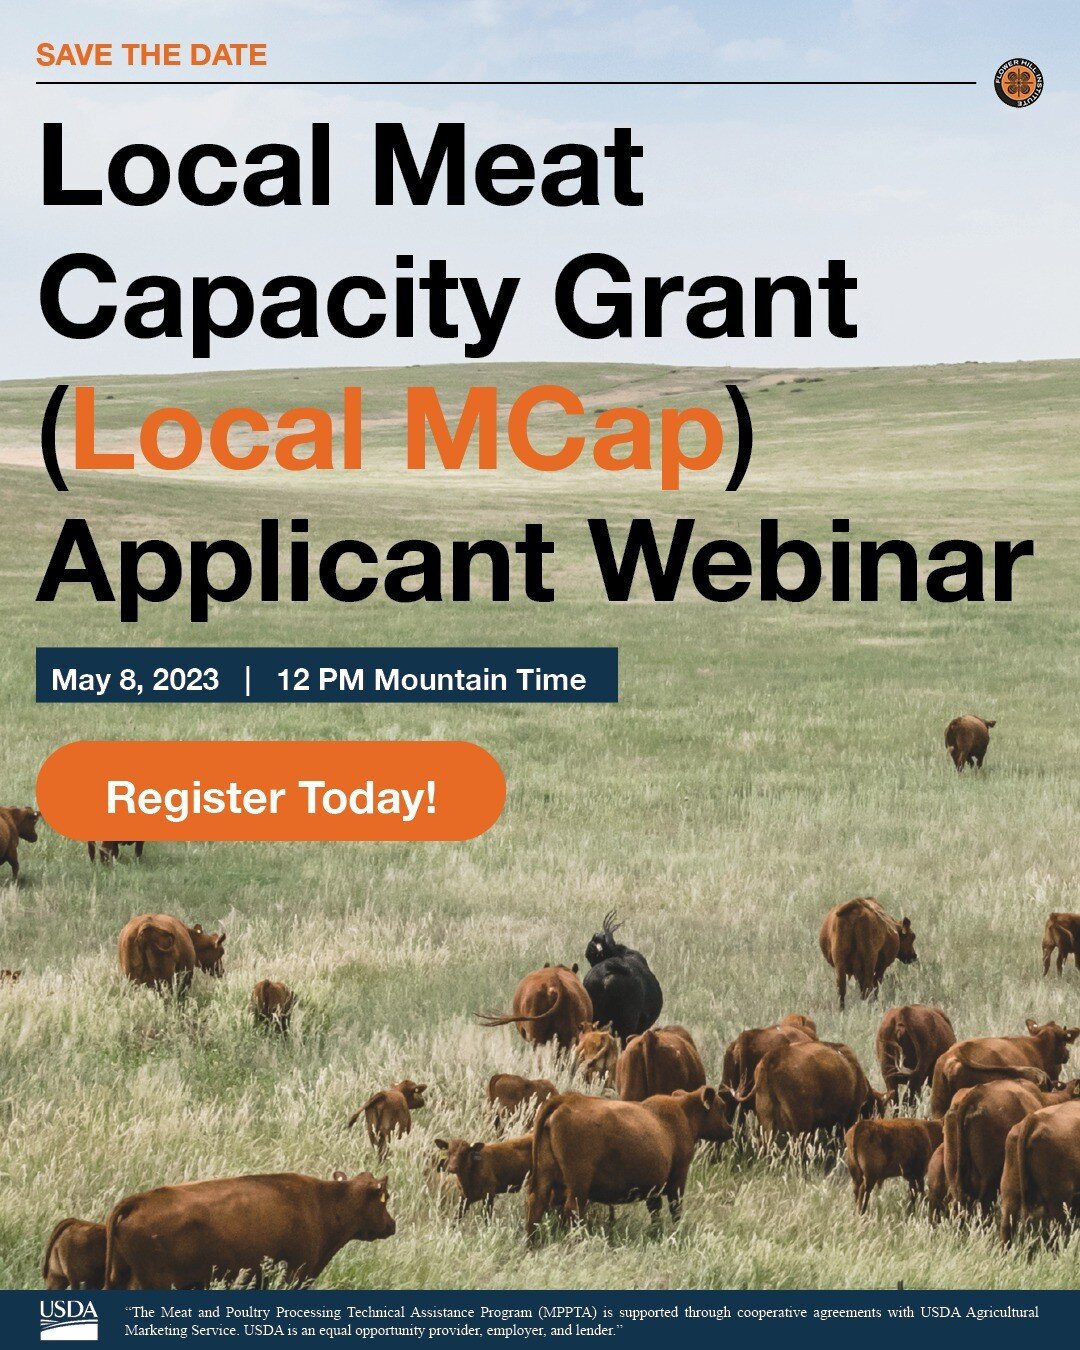 Flower Hill Institute presents the Local Meat Capacity Grant (Local MCap) Applicant Webinar for meat and poultry processors. Tune in on Monday, May 8, 2023, at 12 PM Mountain Time (2 PM Eastern Time) for an hour-long presentation on the Local MCap gr